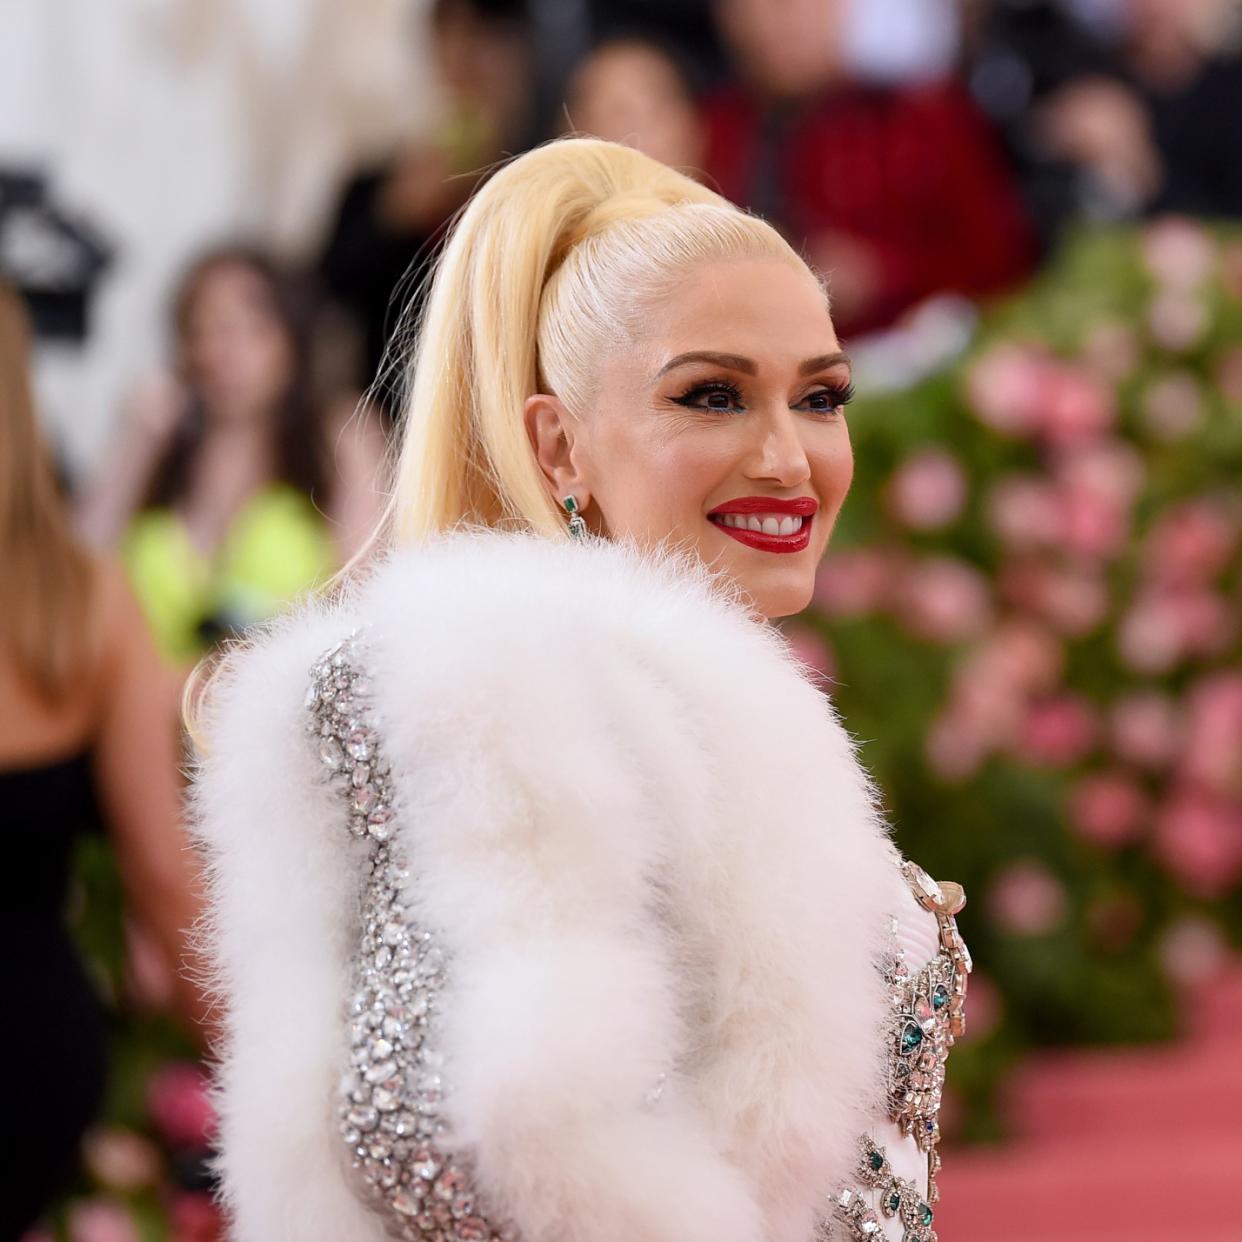  Gwen Stefani attends The 2019 Met Gala Celebrating Camp: Notes on Fashion at Metropolitan Museum of Art on May 06, 2019 in New York City. 